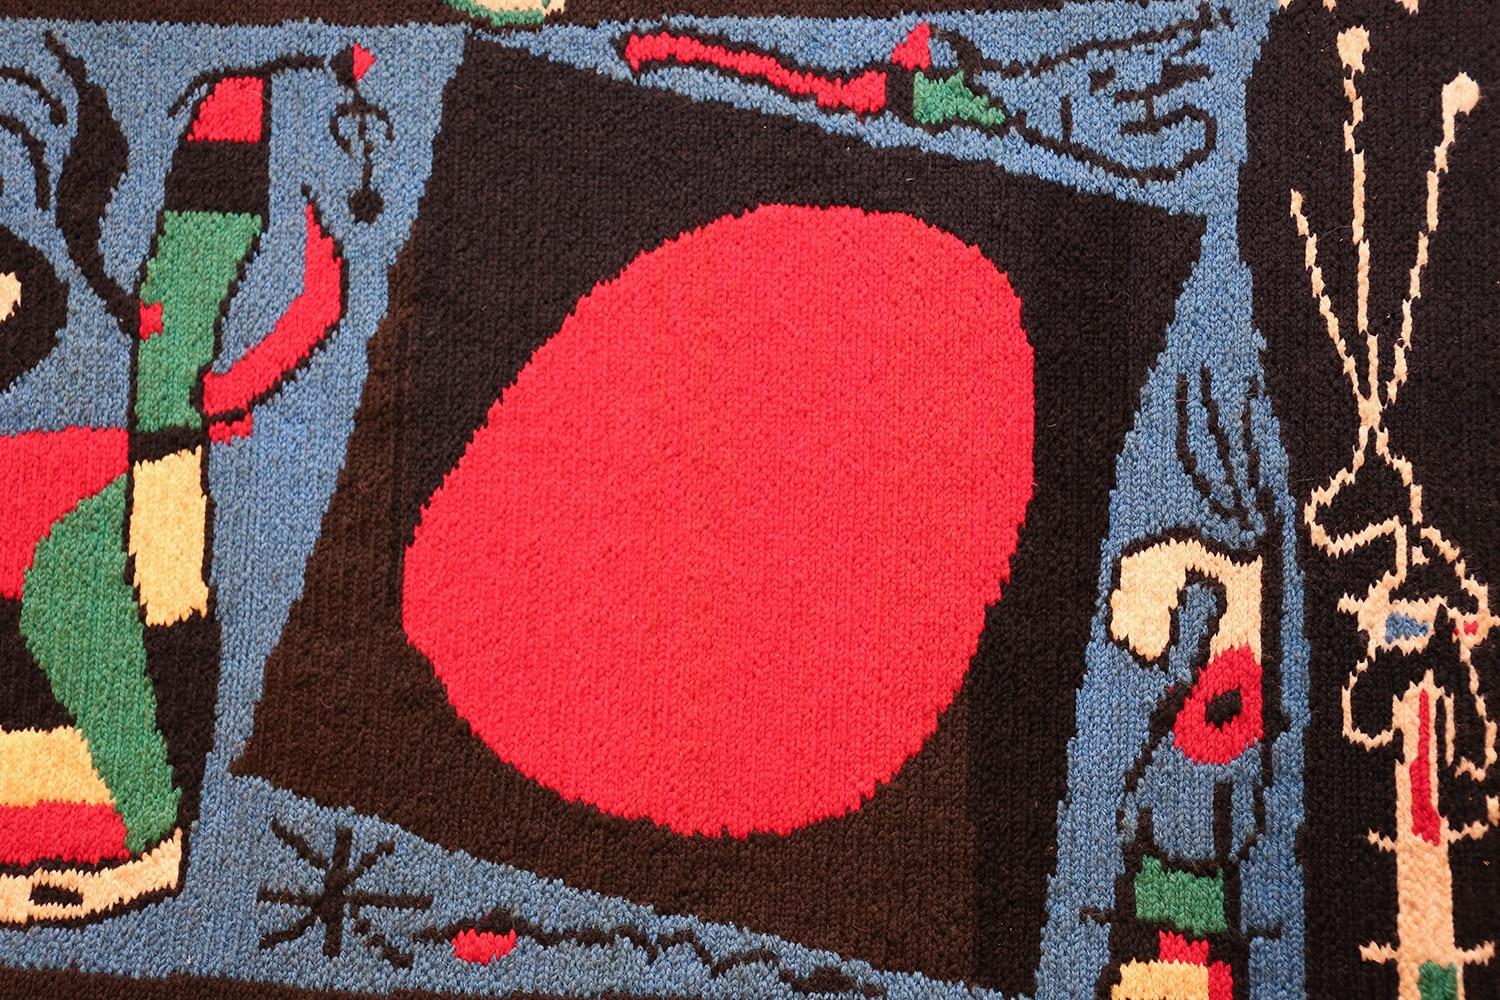 Beautiful (Chain stitch technique) vintage Joan Miro tapestry rug, country of origin / rug type: French Rug, date circa 1960's. Size: 2 ft 10 in x 1 ft 10 in (0.86 m x 0.56 m). 

This beautiful textile art tapestry is meant to convey a defining